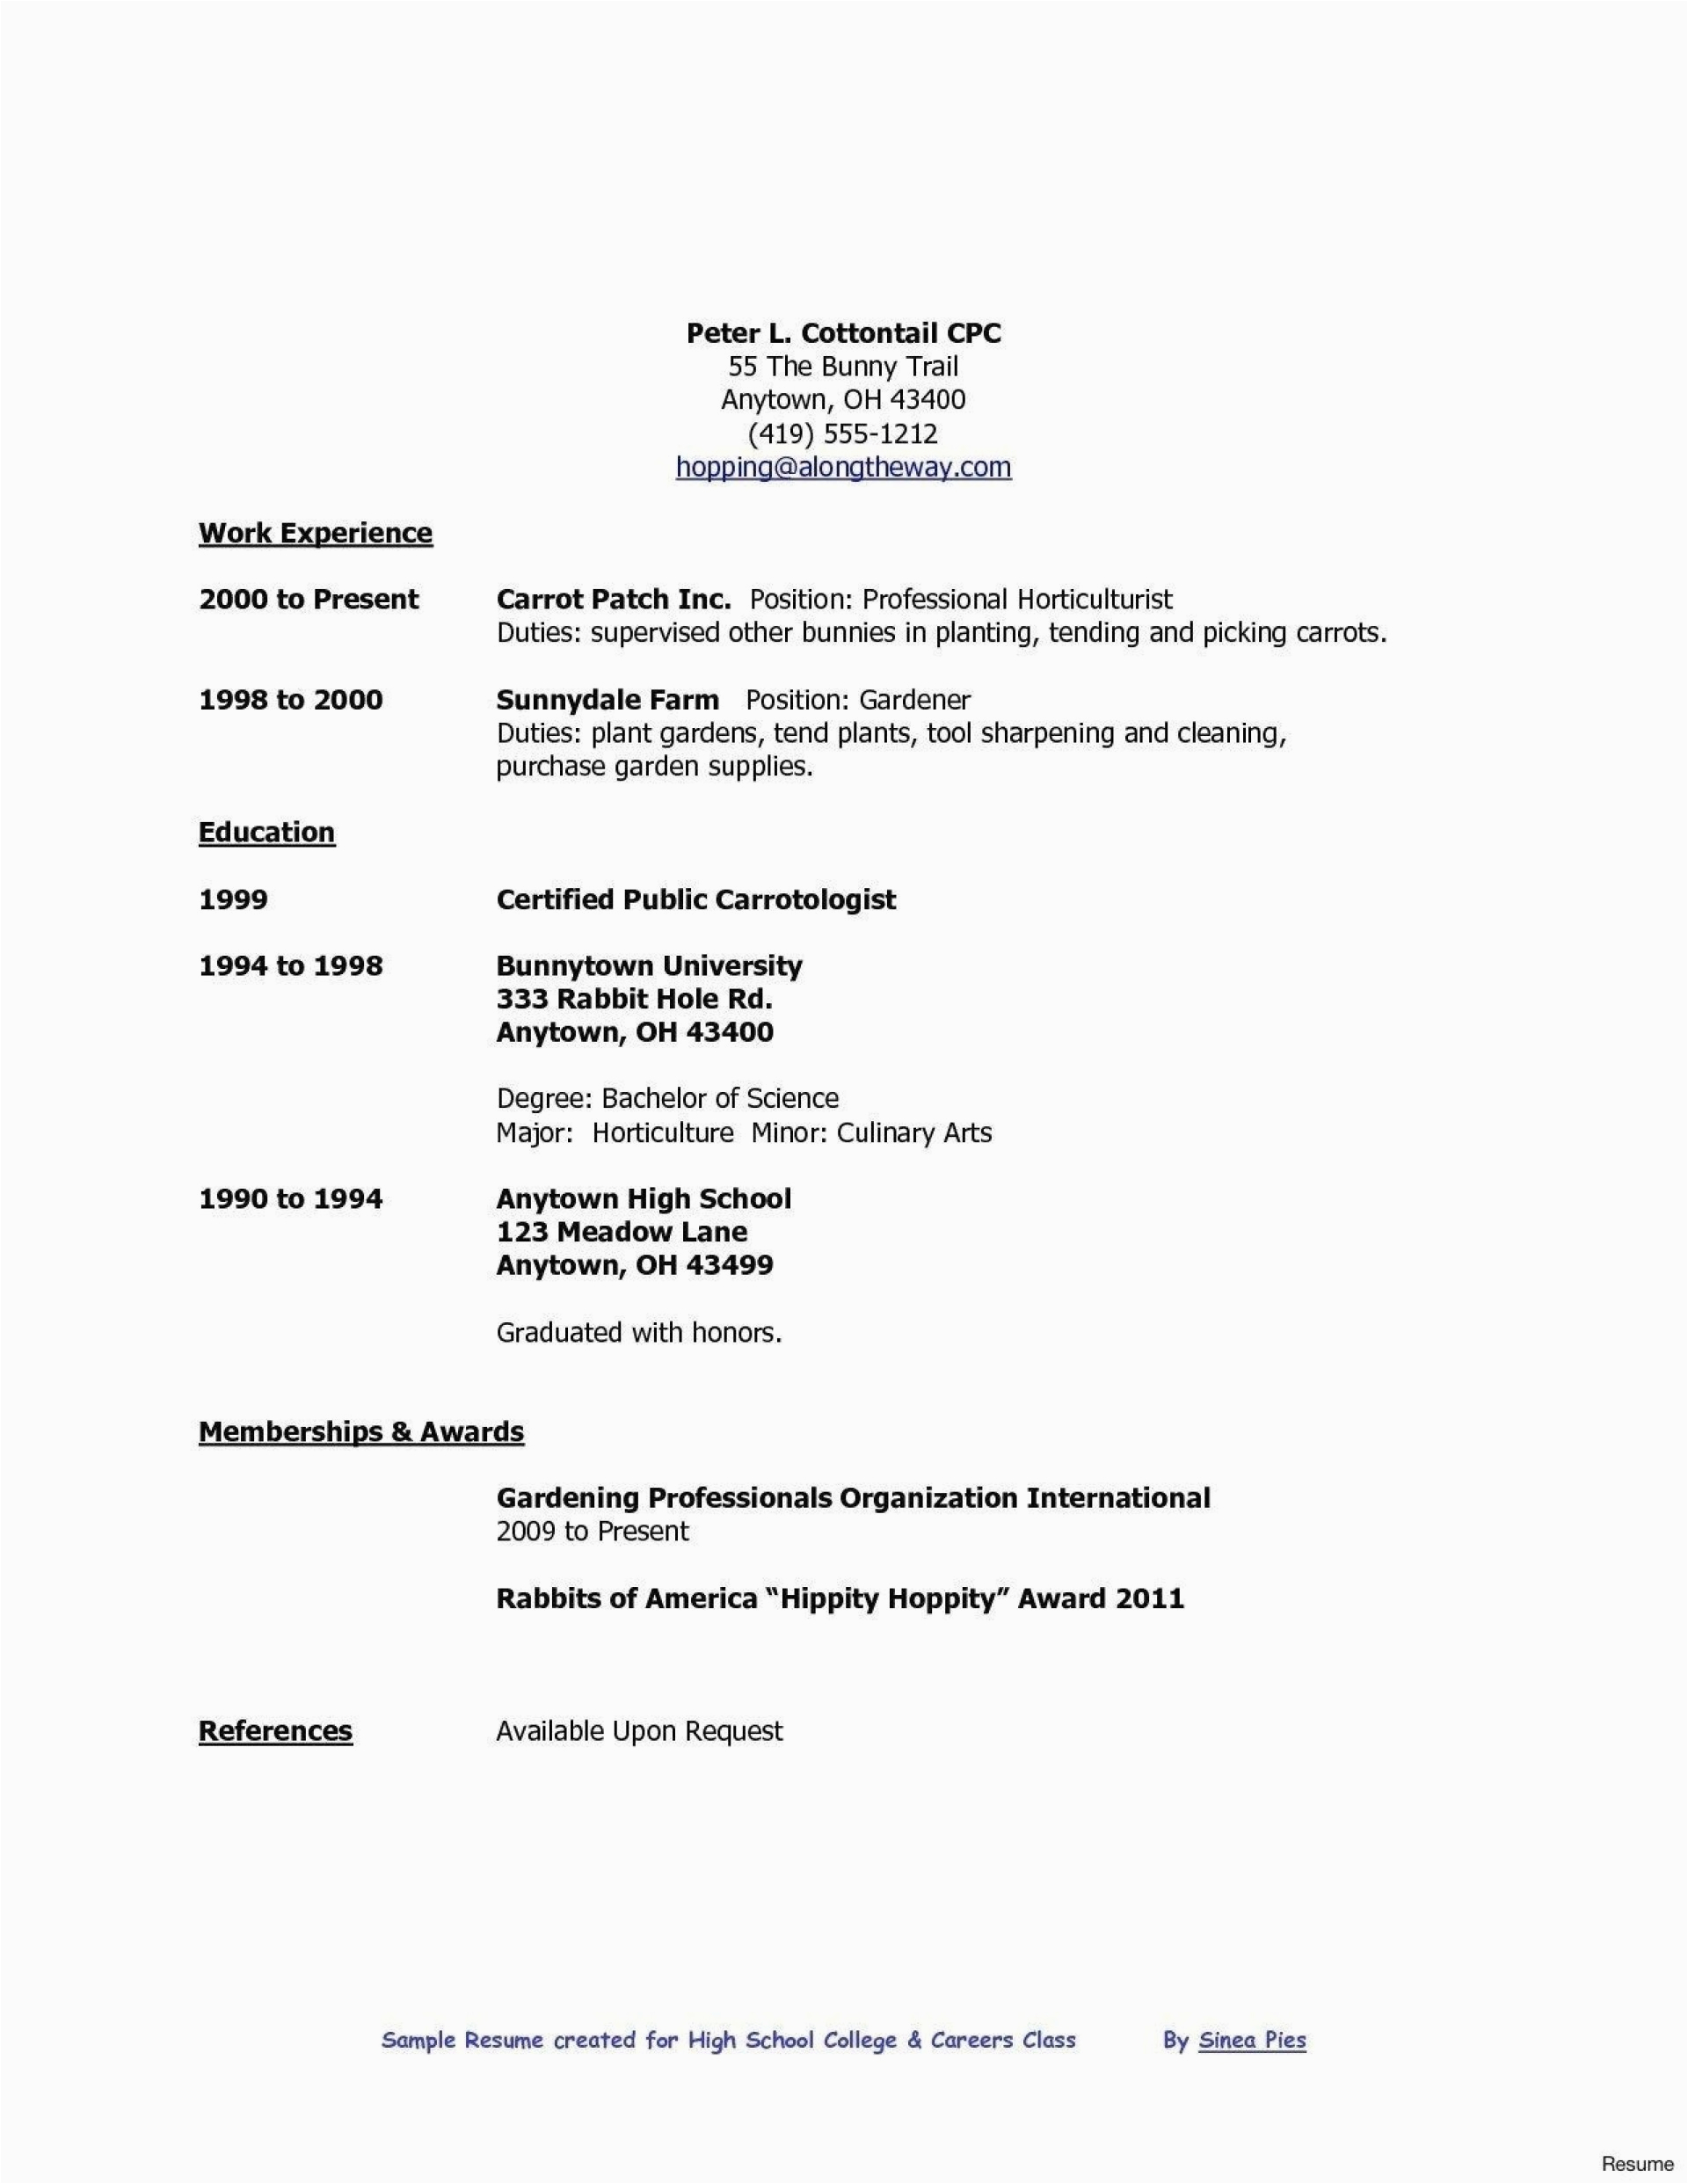 Sample Resume for High School Graduate with No Work Experience Grade 10 Teenager High School Student Resume with No Work